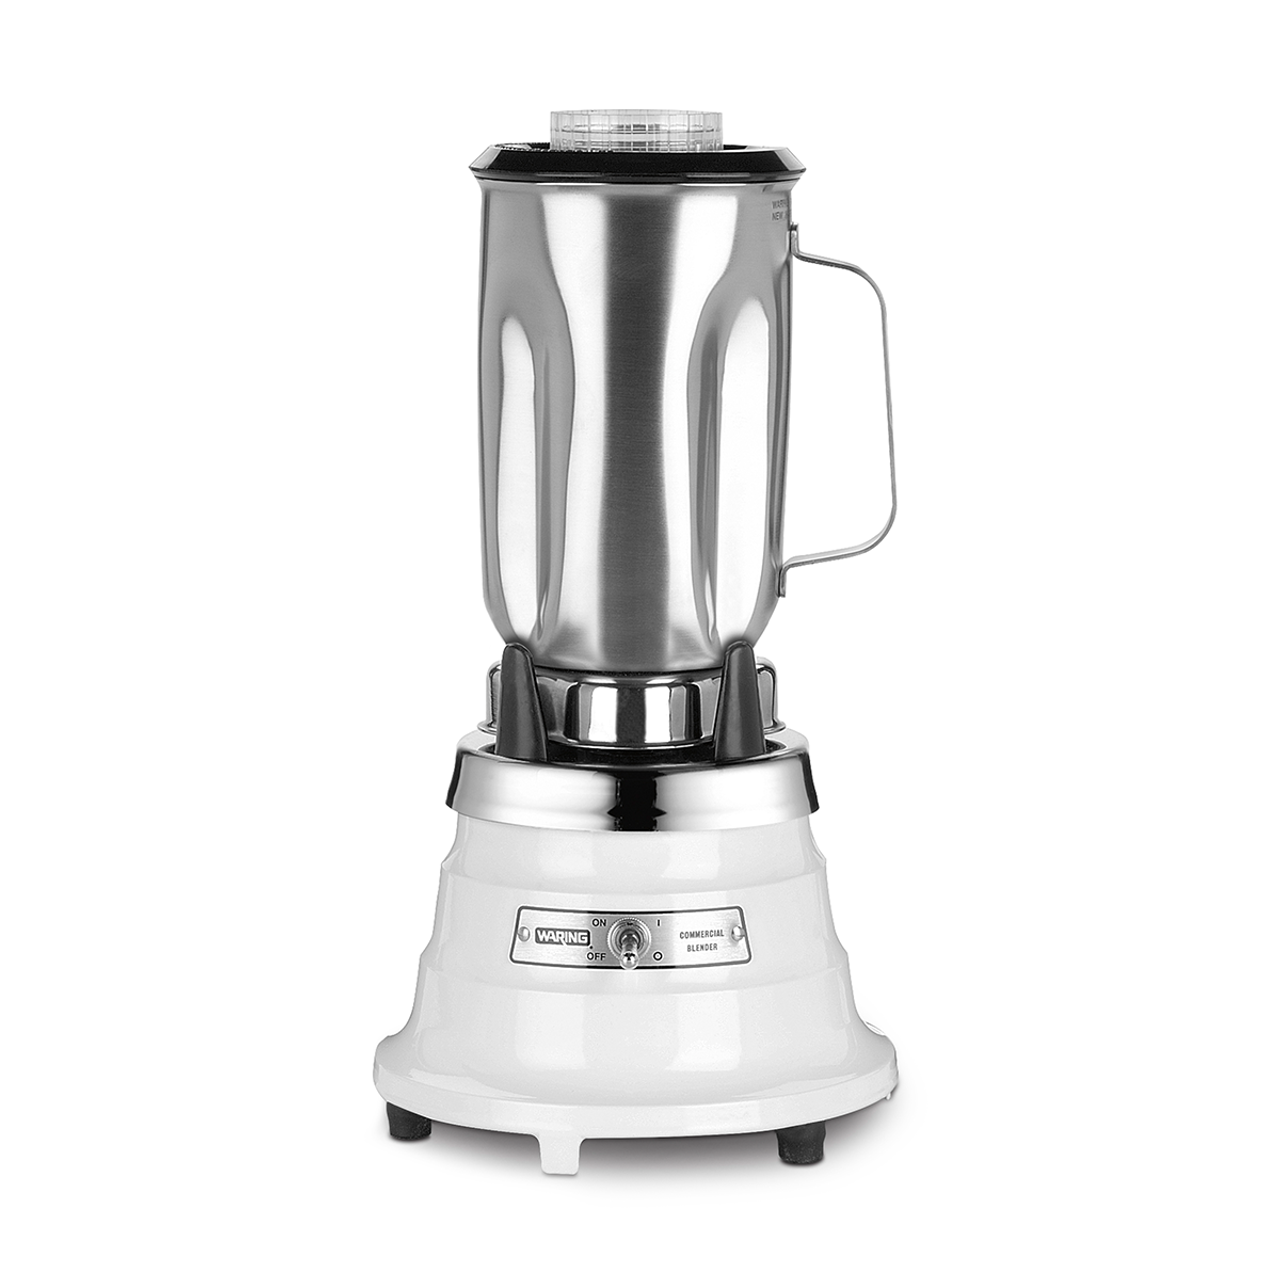 https://cdn11.bigcommerce.com/s-48gxyyxkag/images/stencil/1280x1280/products/23106/69601/WARING_700S_1Lt_Single-Speed_Blender_with_Stainless_Steel_Container_120V_-_S5180-1__82536.1680042912.png?c=1